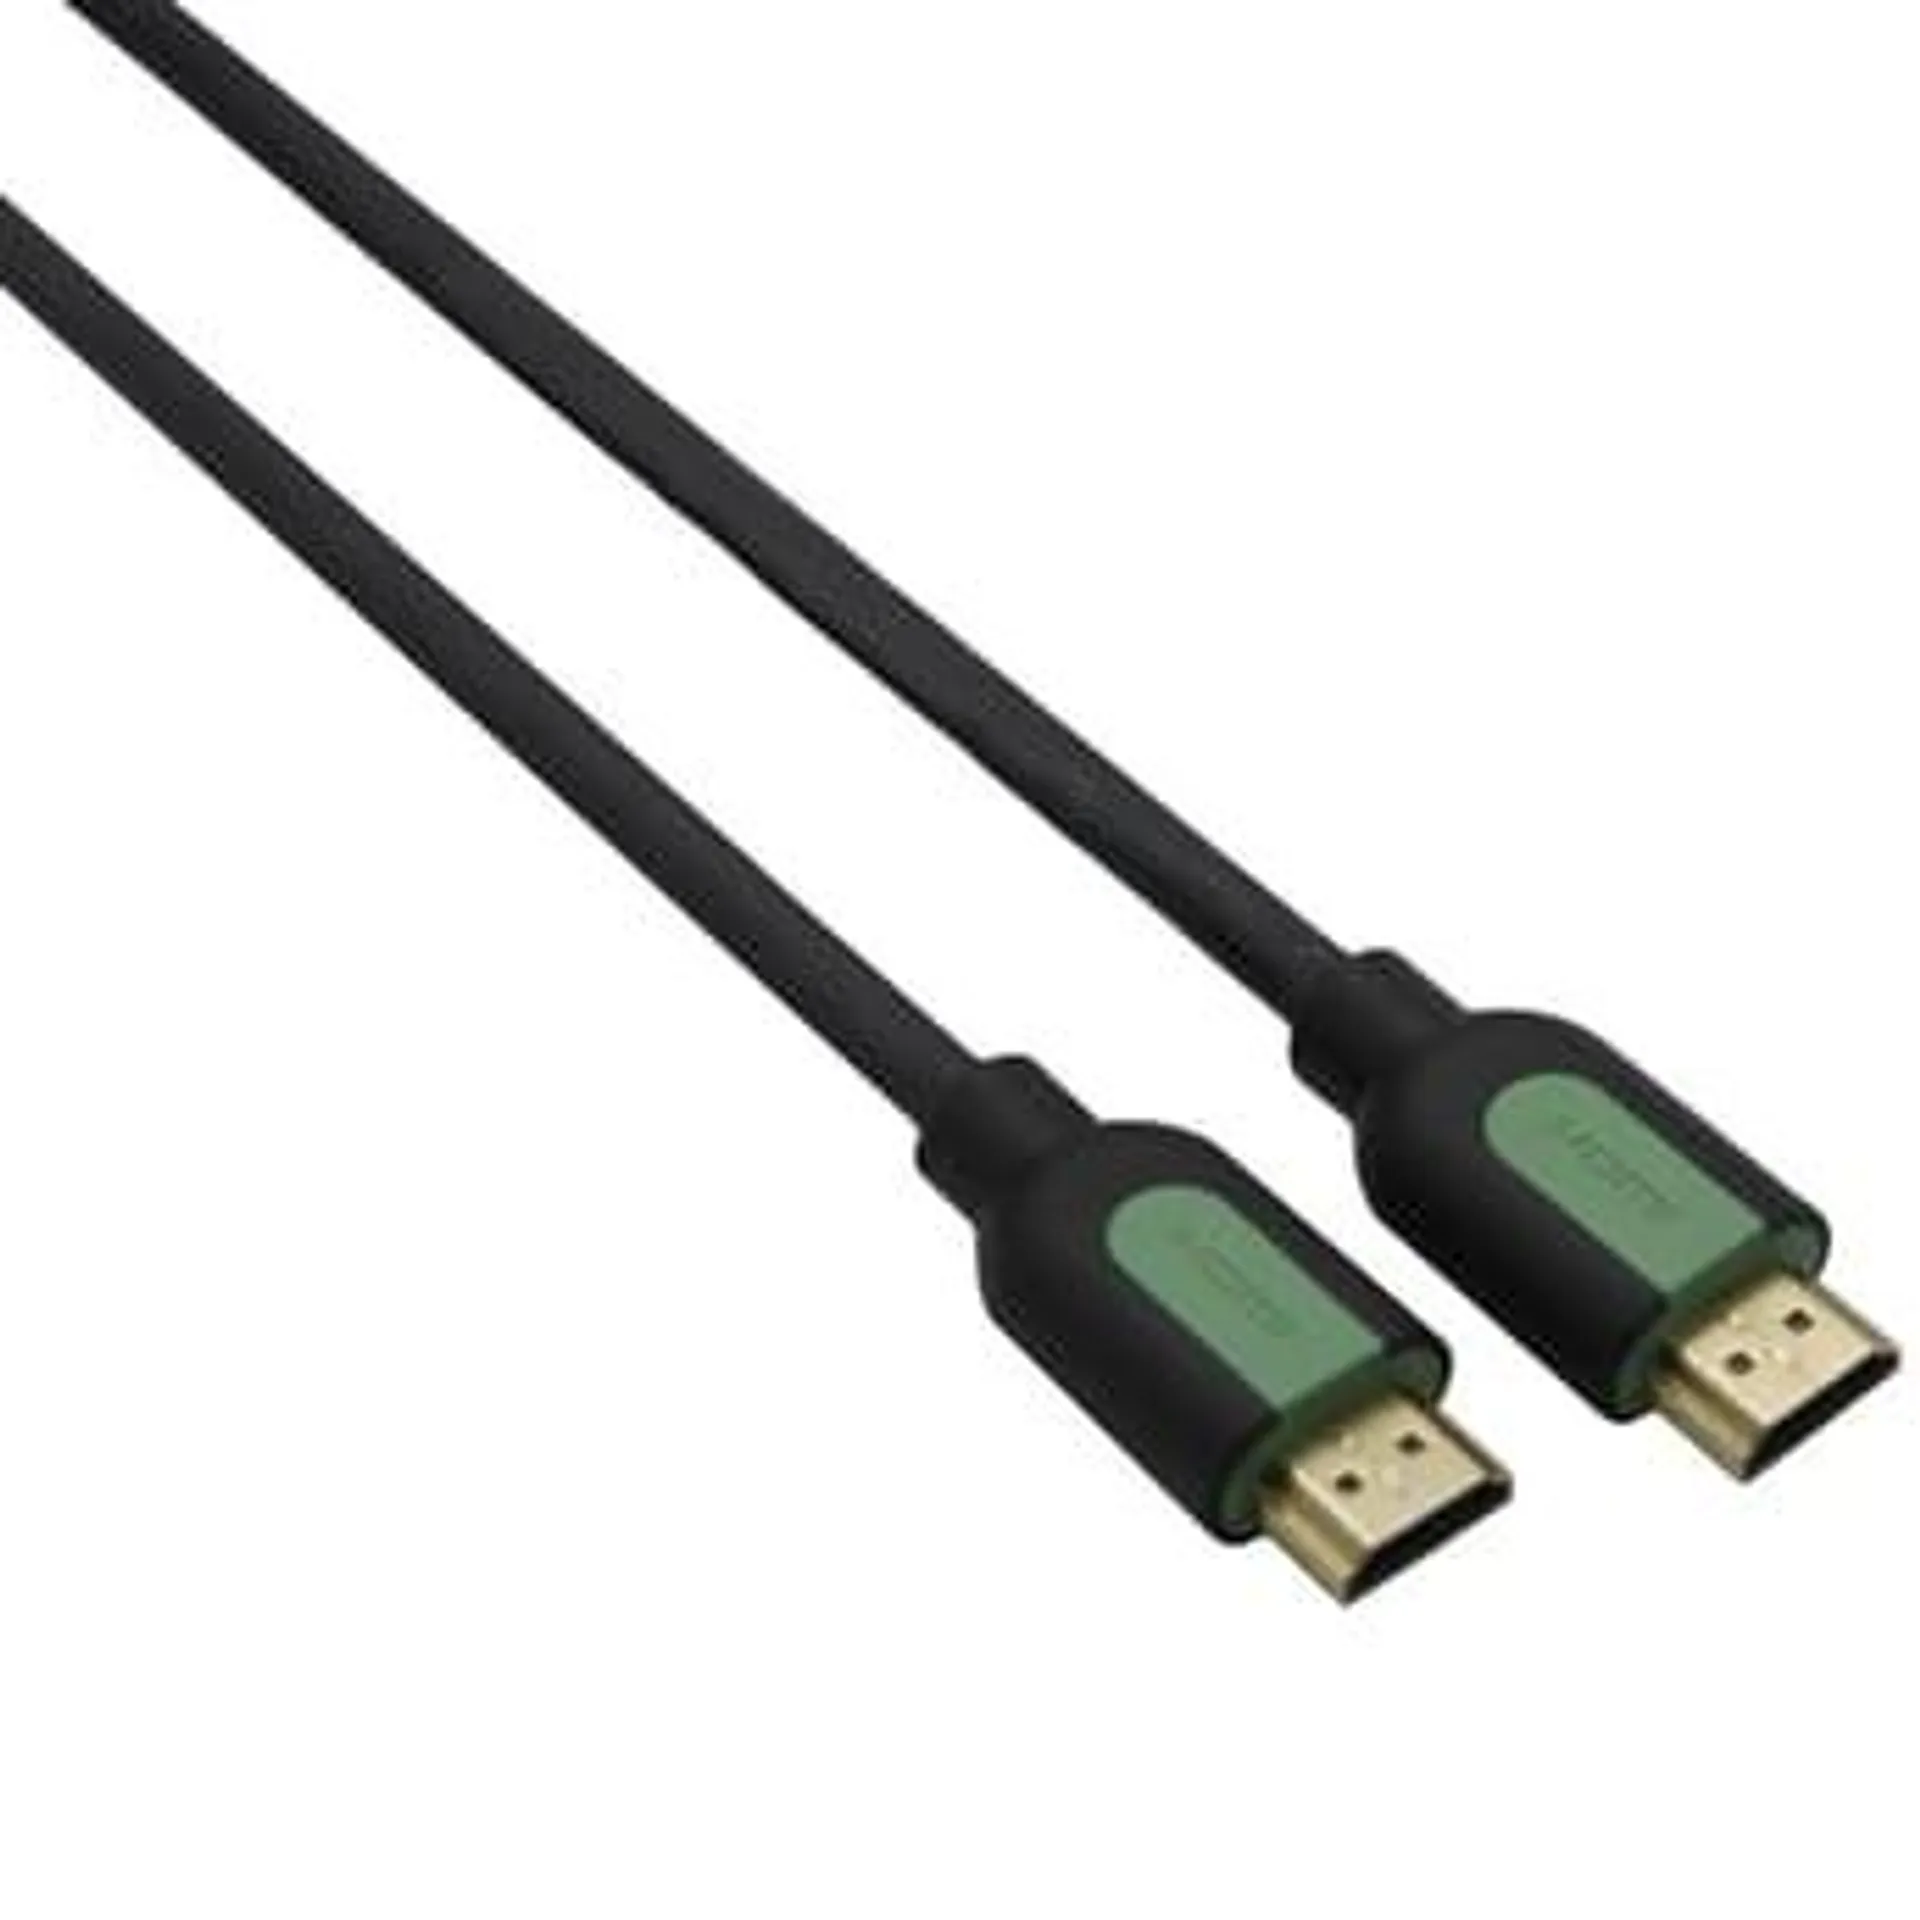 GIZZU High-Speed V2.0 HDMI Cable (0.6m)